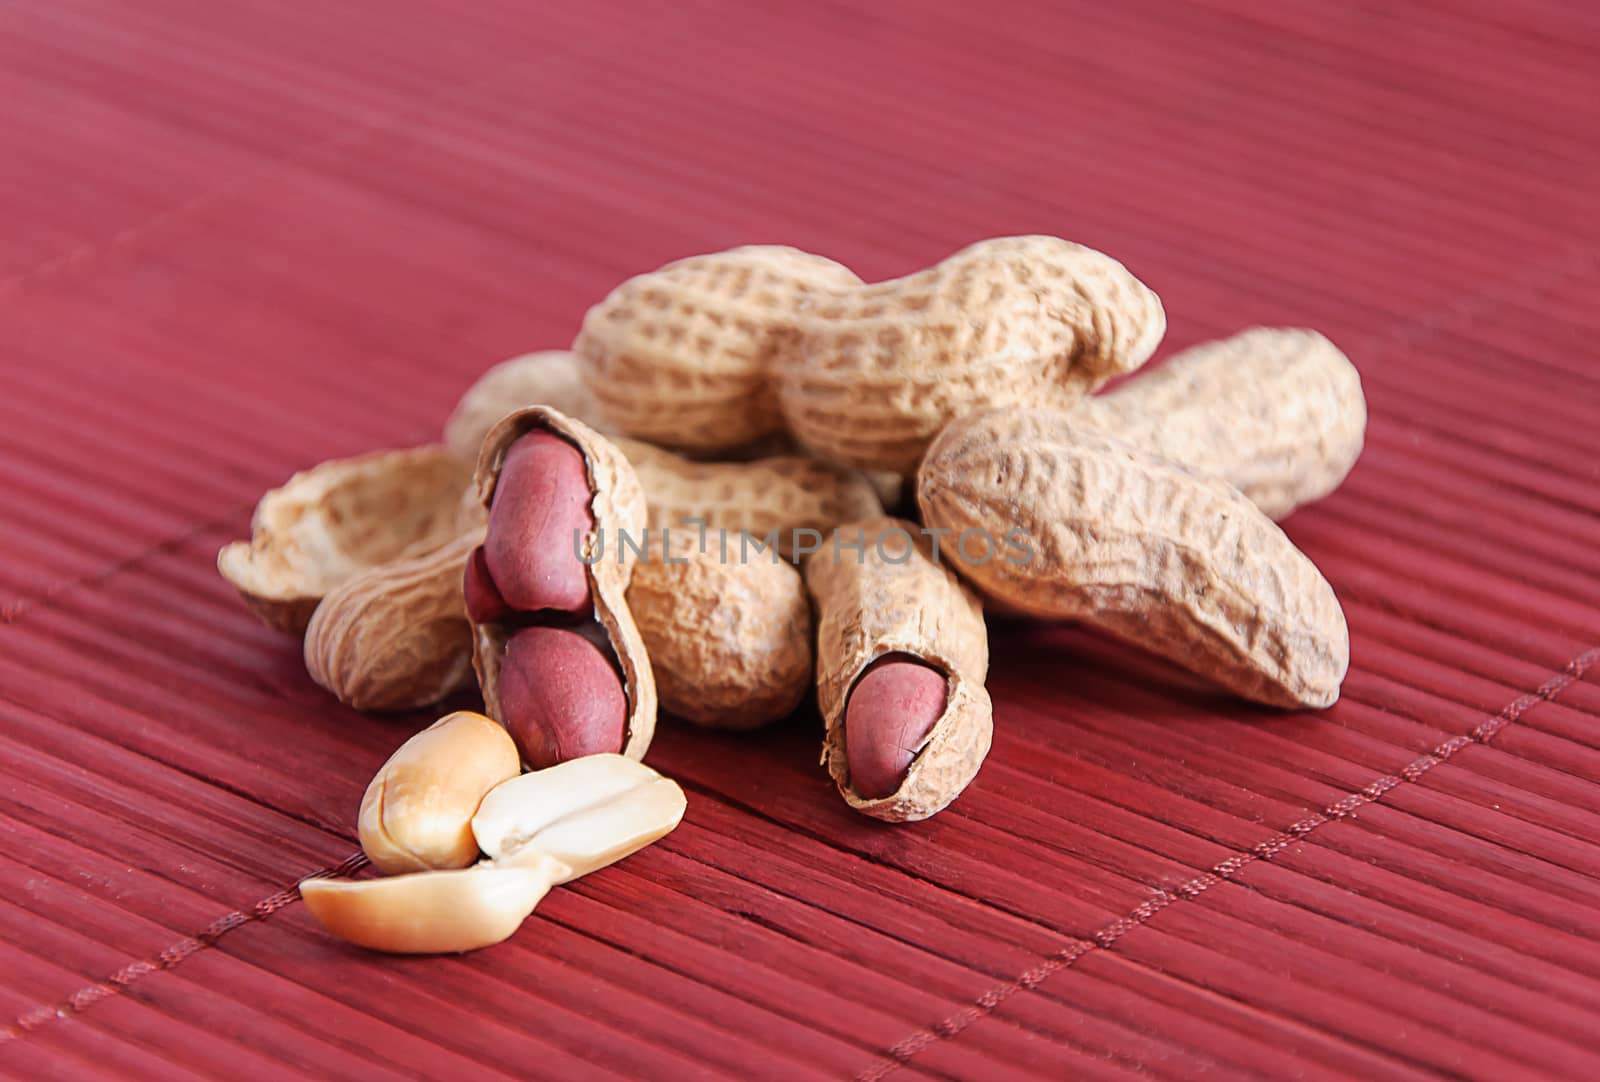 Peanuts in shels on violet pad, stock photo